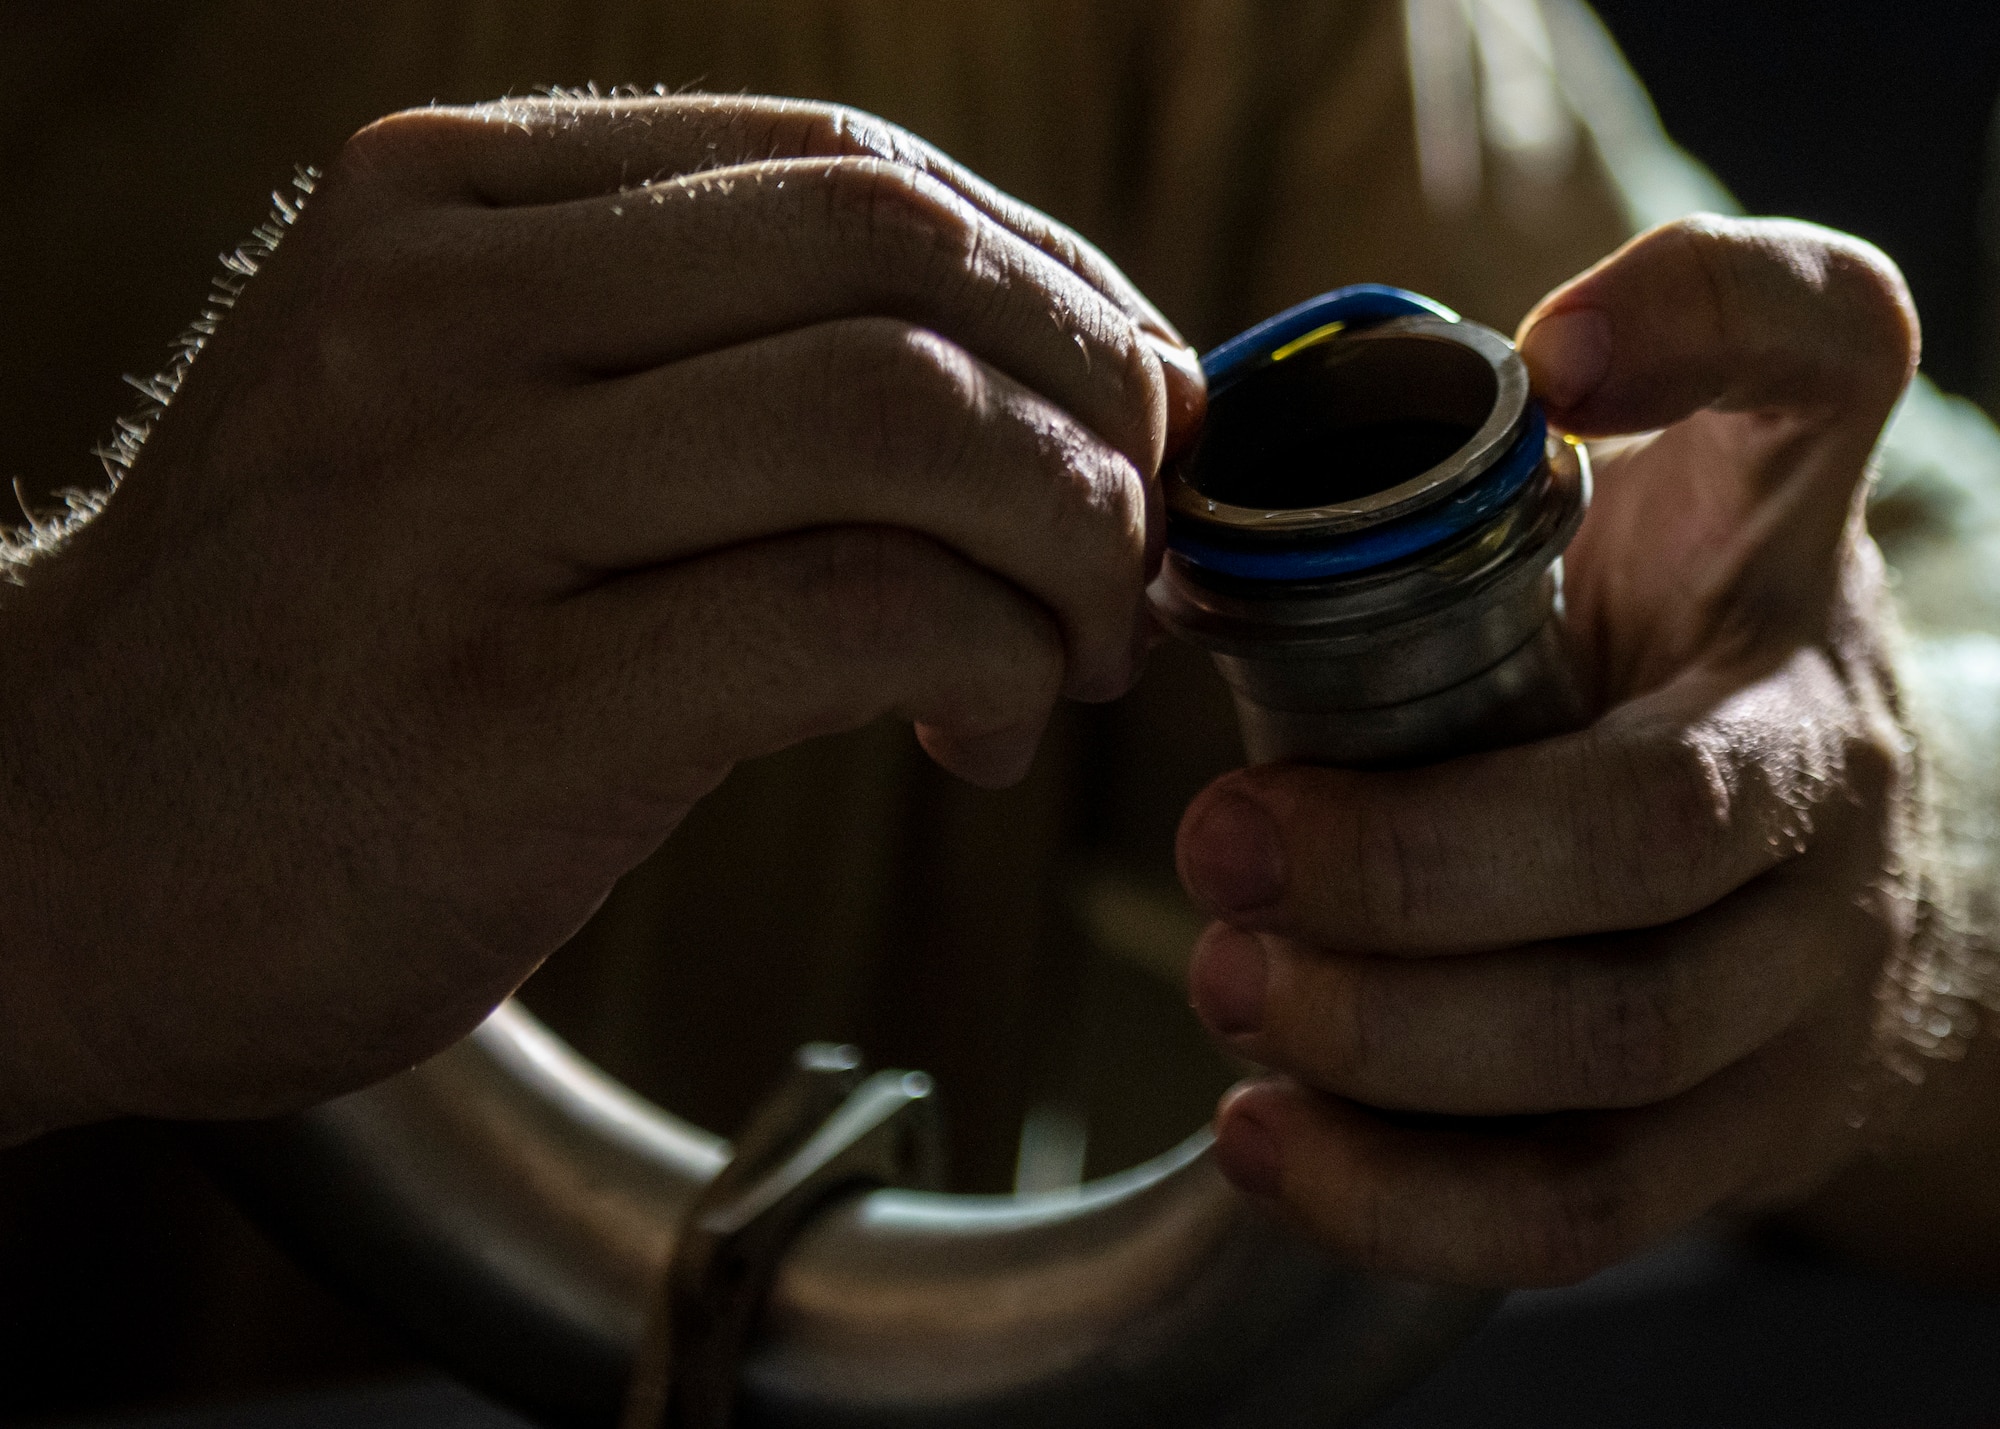 Tech. Sgt. Chance Gorham, 5th Expeditionary Air Mobility Squadron instruments and flight control systems craftsmen, attaches an O-ring to a fuel pump component.